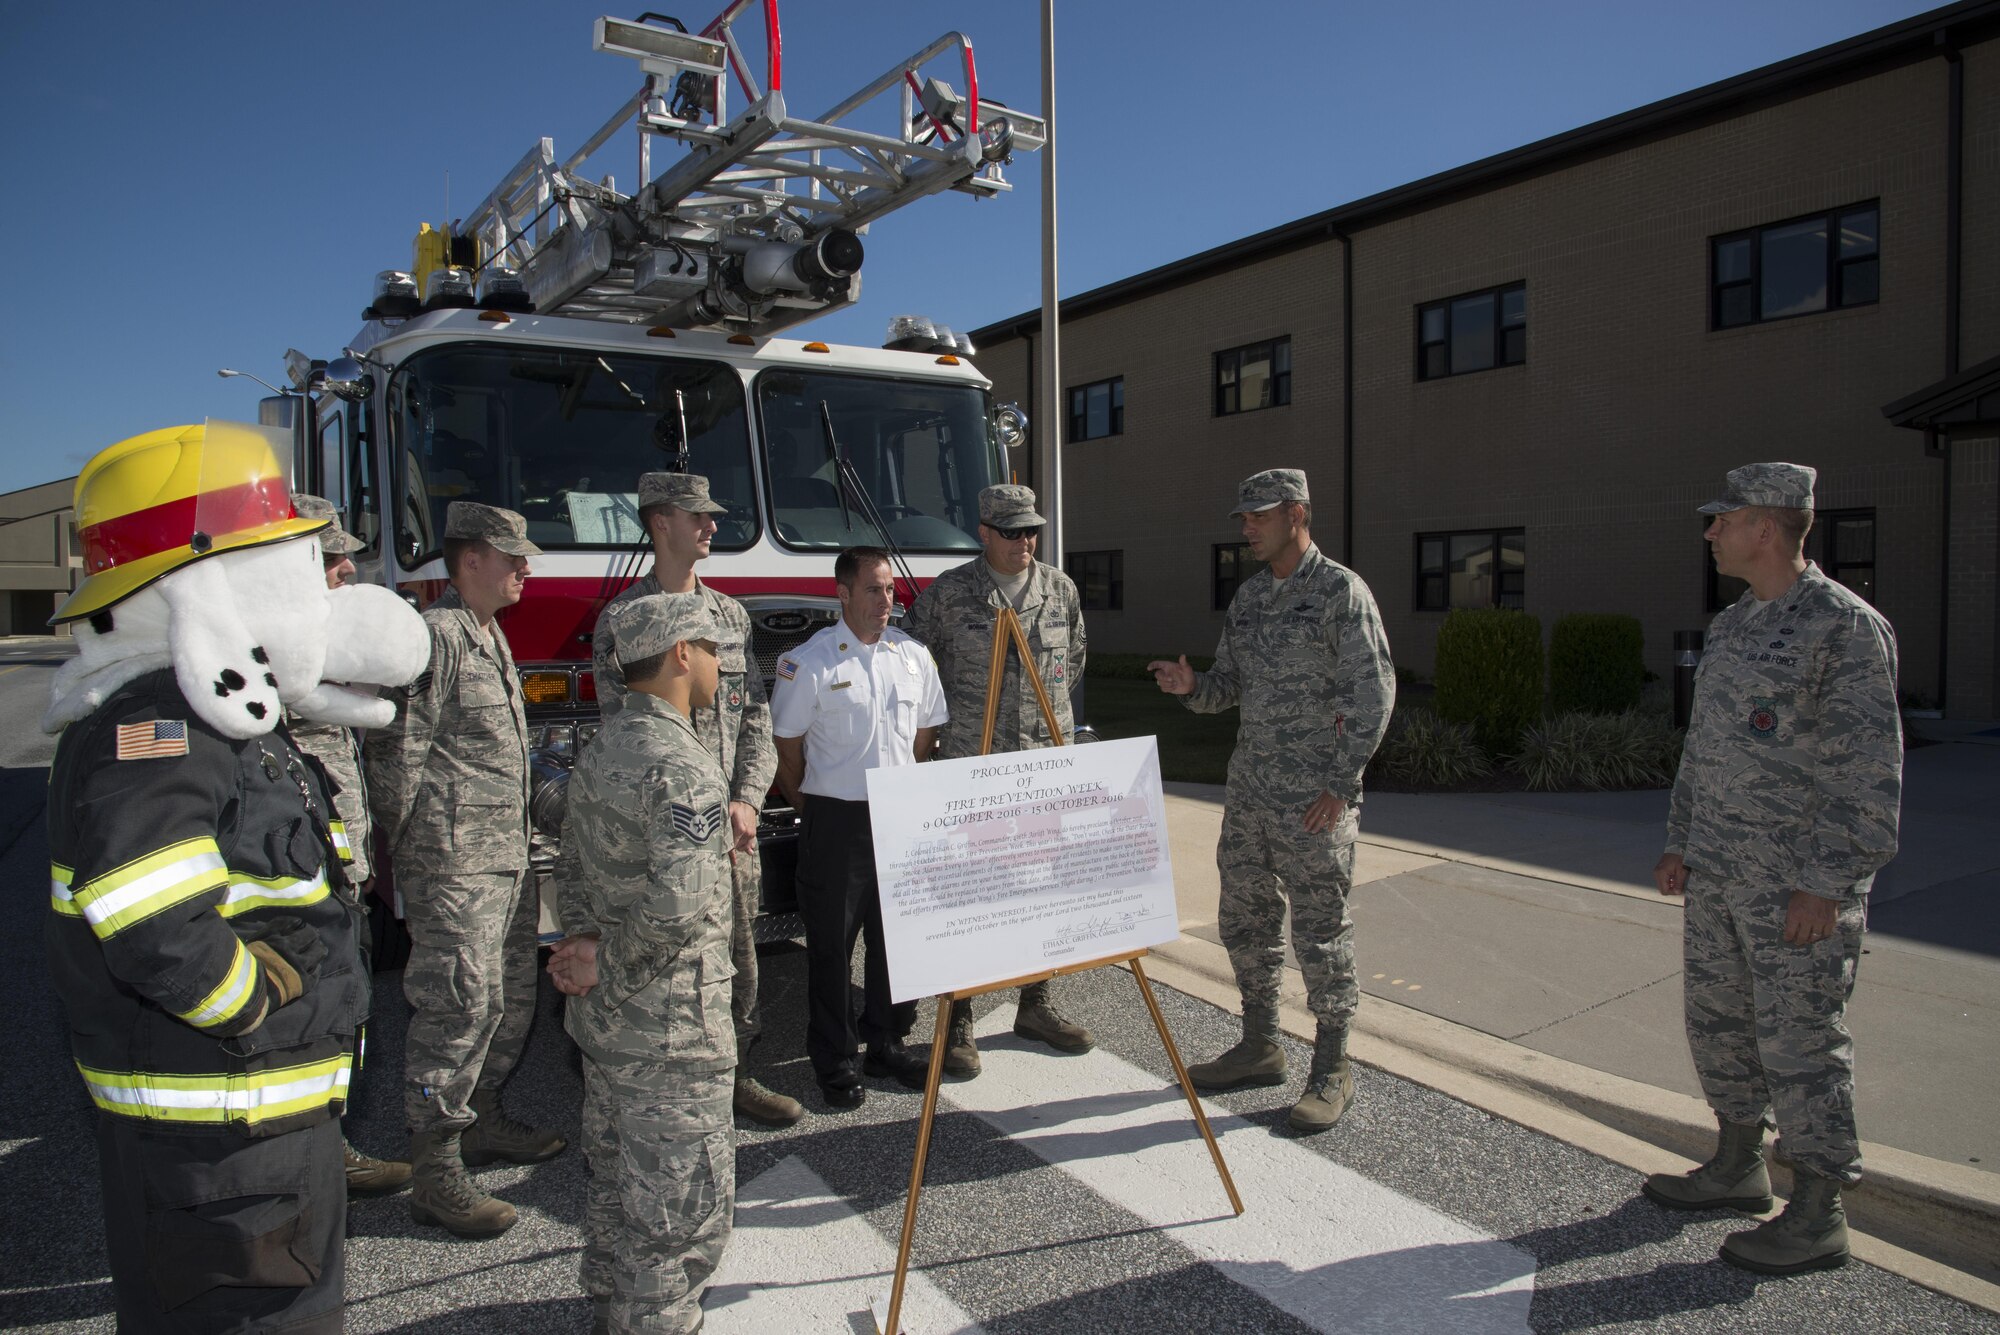 Col. Ethan Griffin, 436th Airlift Wing commander, thanks members of the 436th Civil Engineer Squadron Fire Department for their efforts to make Fire Prevention Week a success Oct. 6, 2016, at Dover Air Force Base, Del. The unit’s firefighters volunteer their time to host public events while their on-the-clock wingmen keep the installation safe. (U.S. Air Force photo by Senior Airman Aaron J. Jenne)